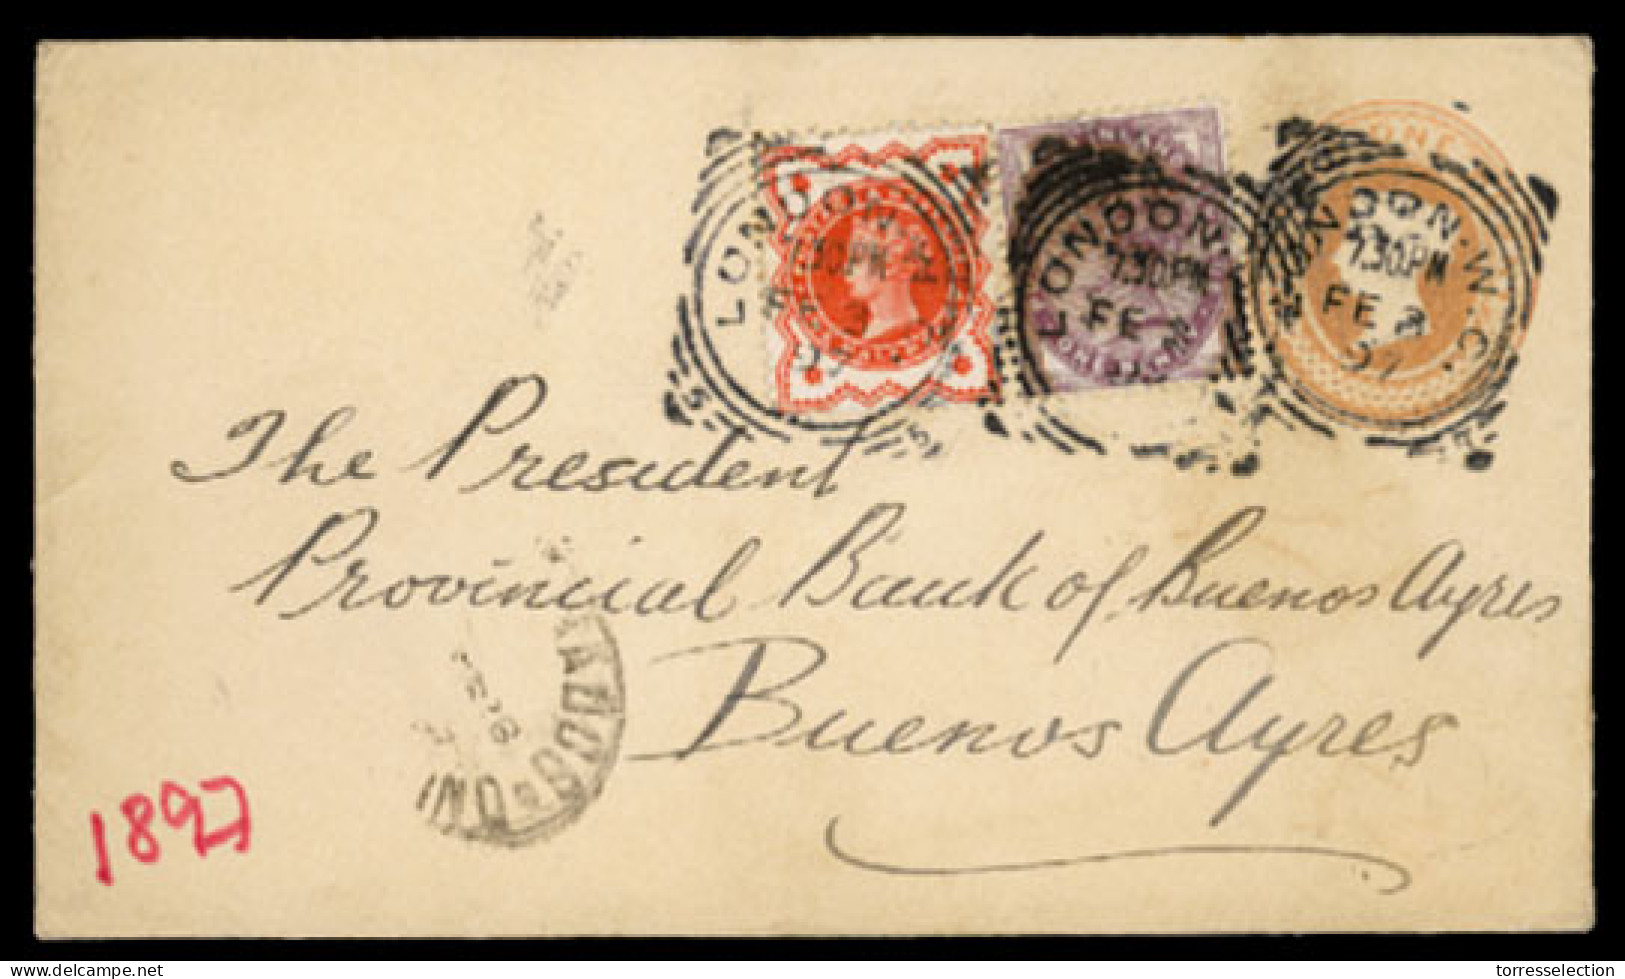 GREAT BRITAIN. 1897(Feb 8th). 1d Pink Stationery Envelope Used To Buenos Aires, ARGENTINA And Up-rated With 1887 ½d Verm - ...-1840 Precursores